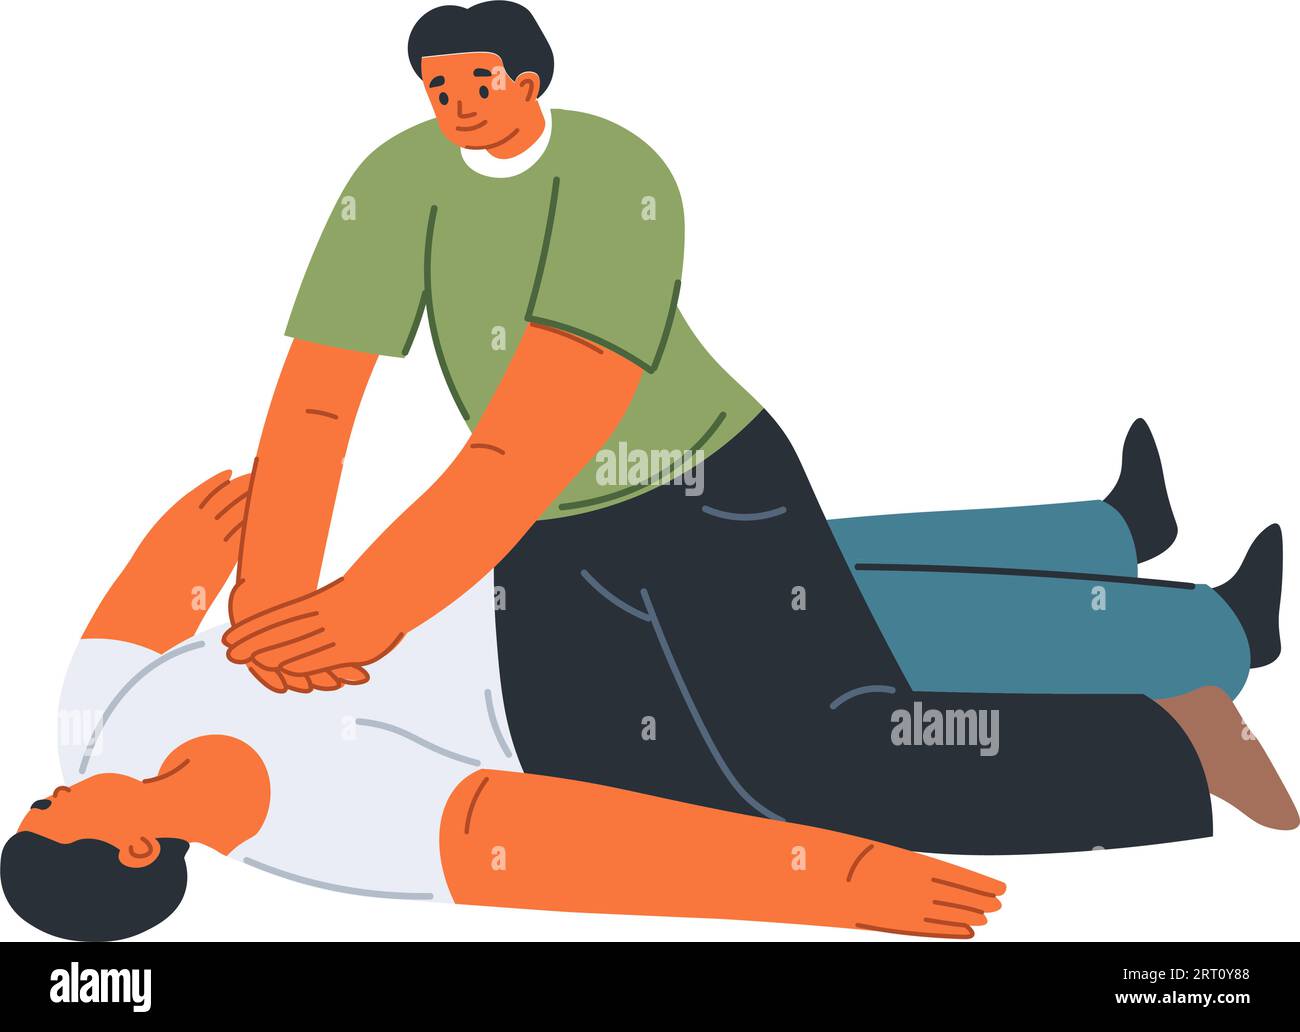 Cardiopulmonary resuscitation lifesaving technique for first aid and medical help in emergency situations. Isolated man giving artificial ventilation Stock Vector